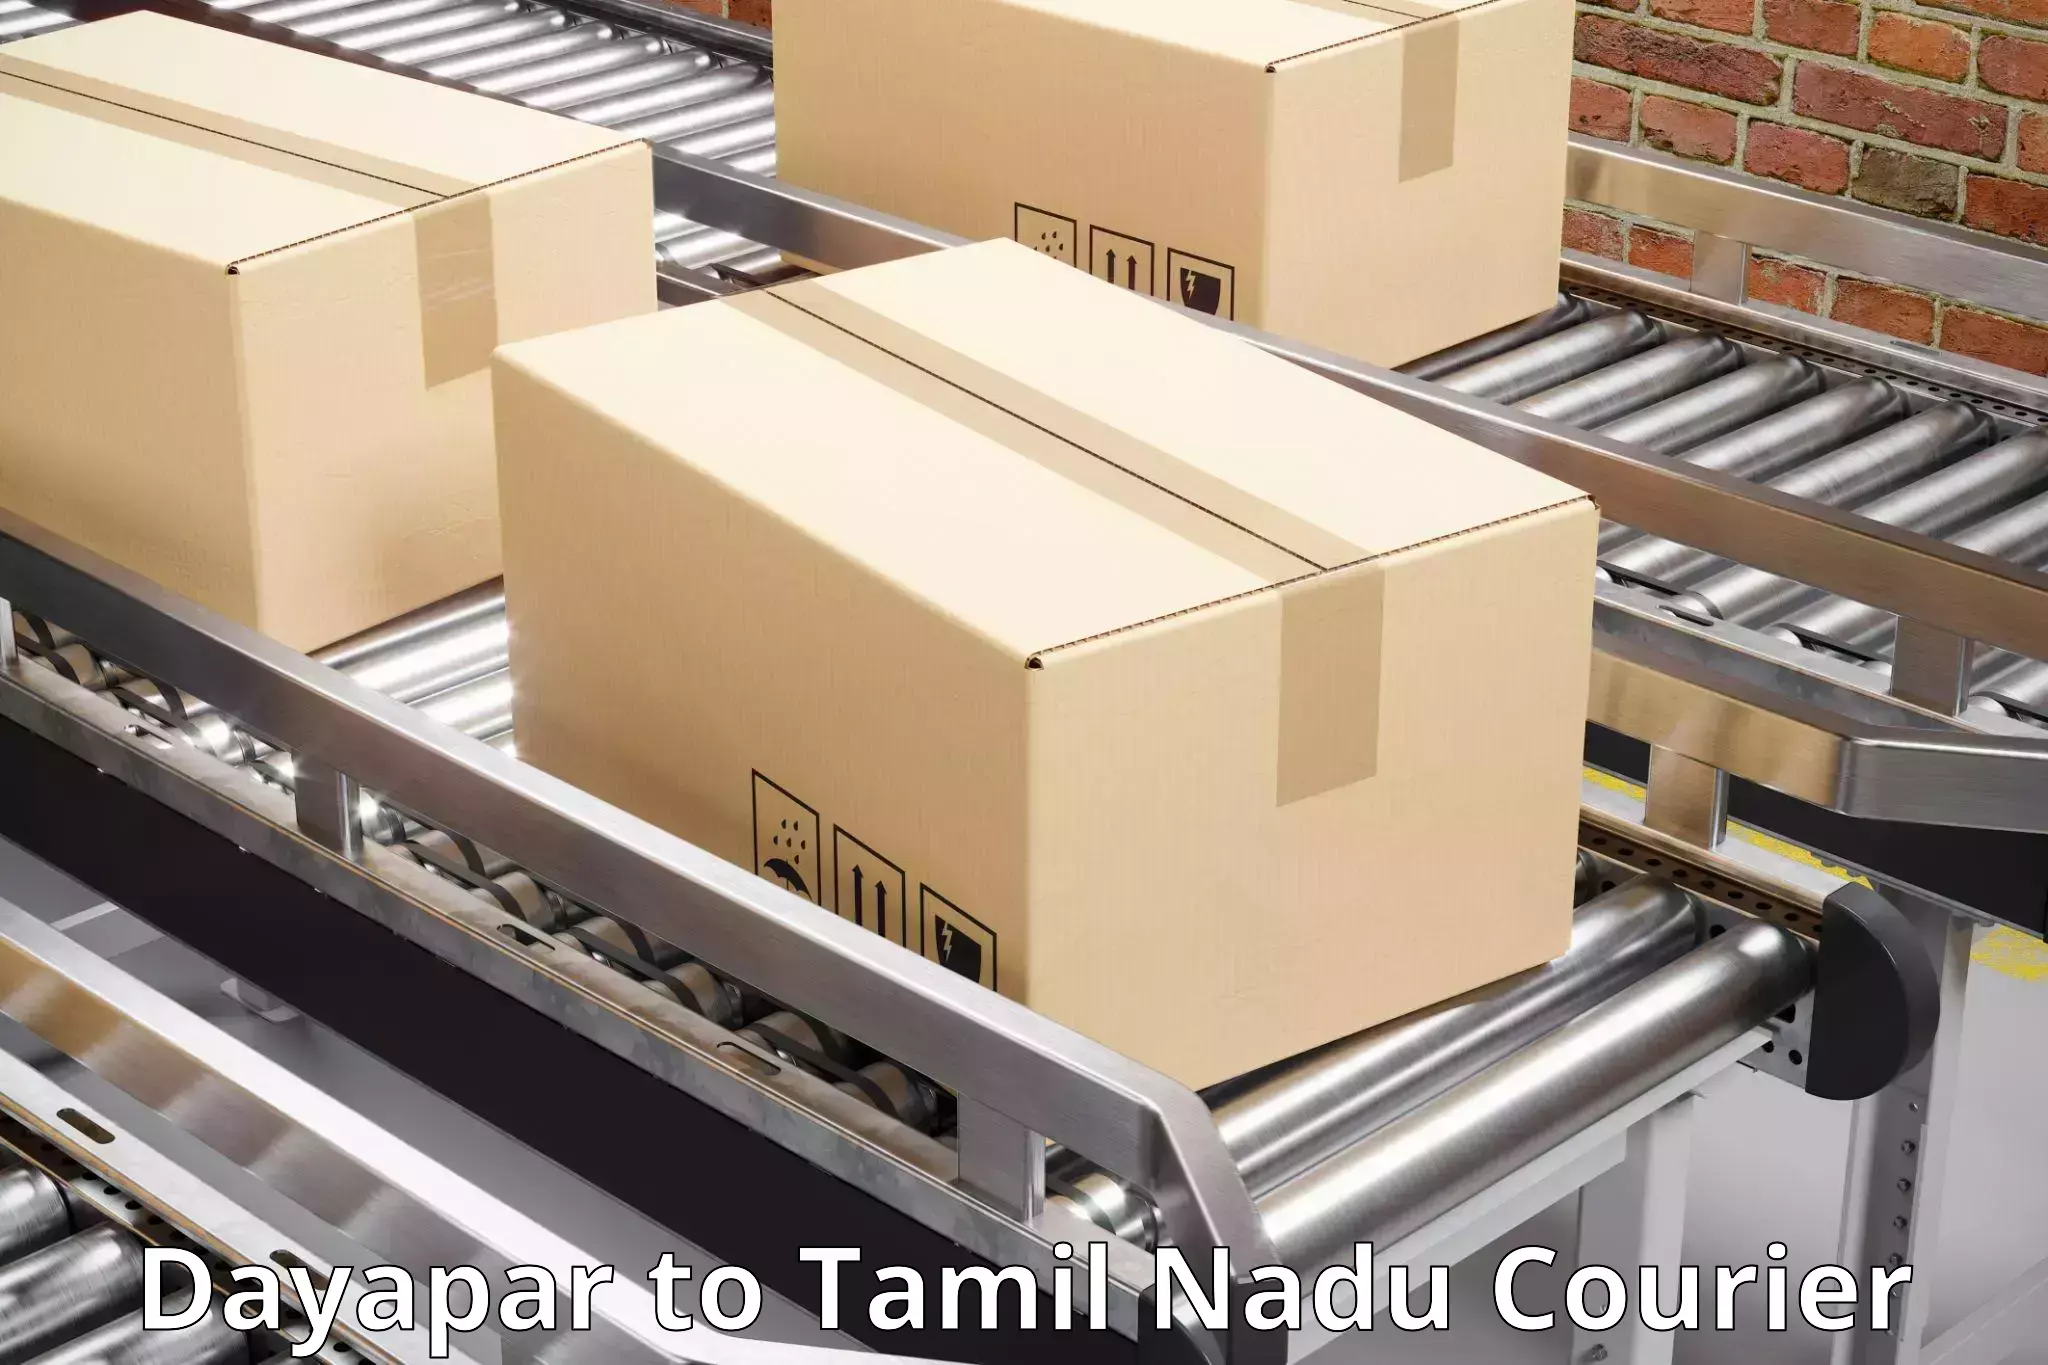 24/7 courier service Dayapar to Nagercoil